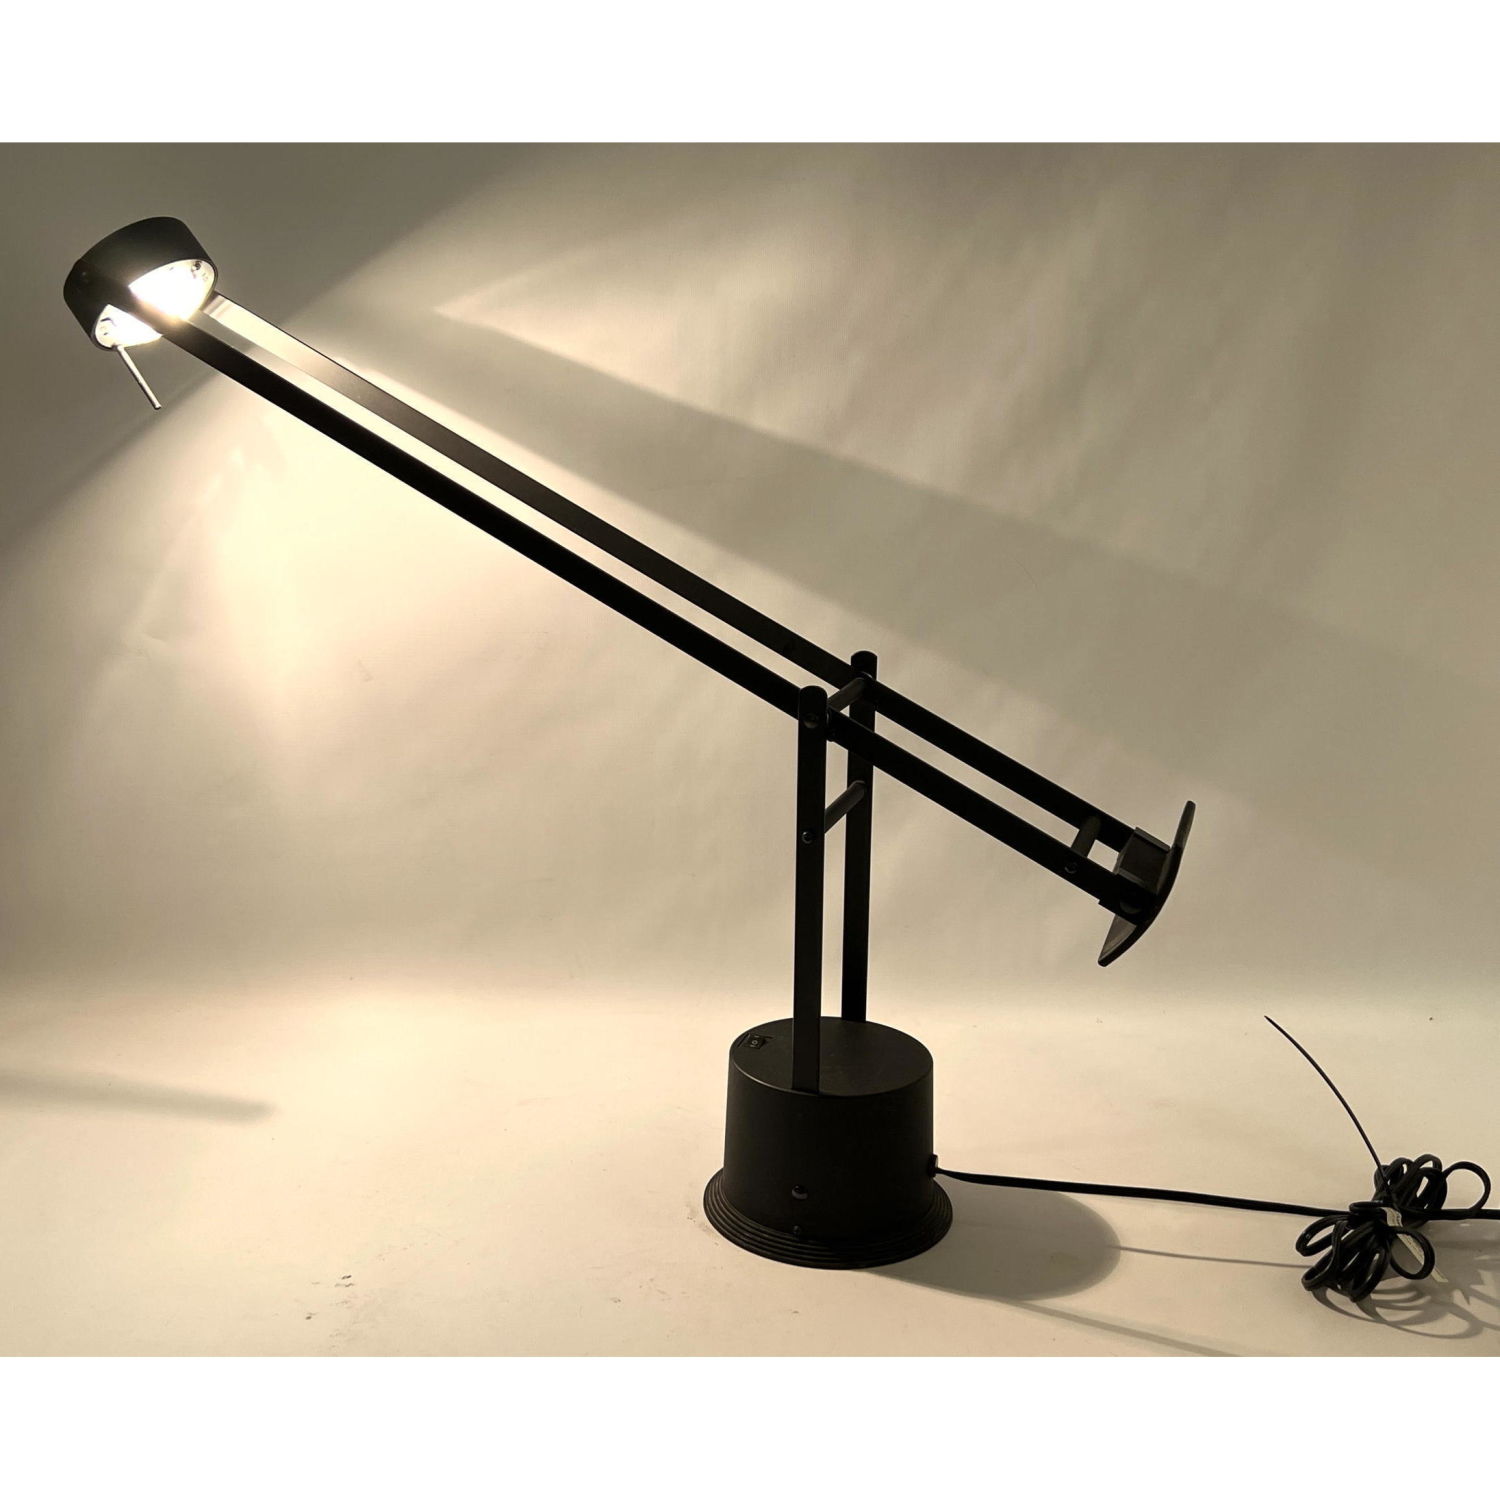 Tizio Style Desk Table Lamp Counterbalance  2b96af